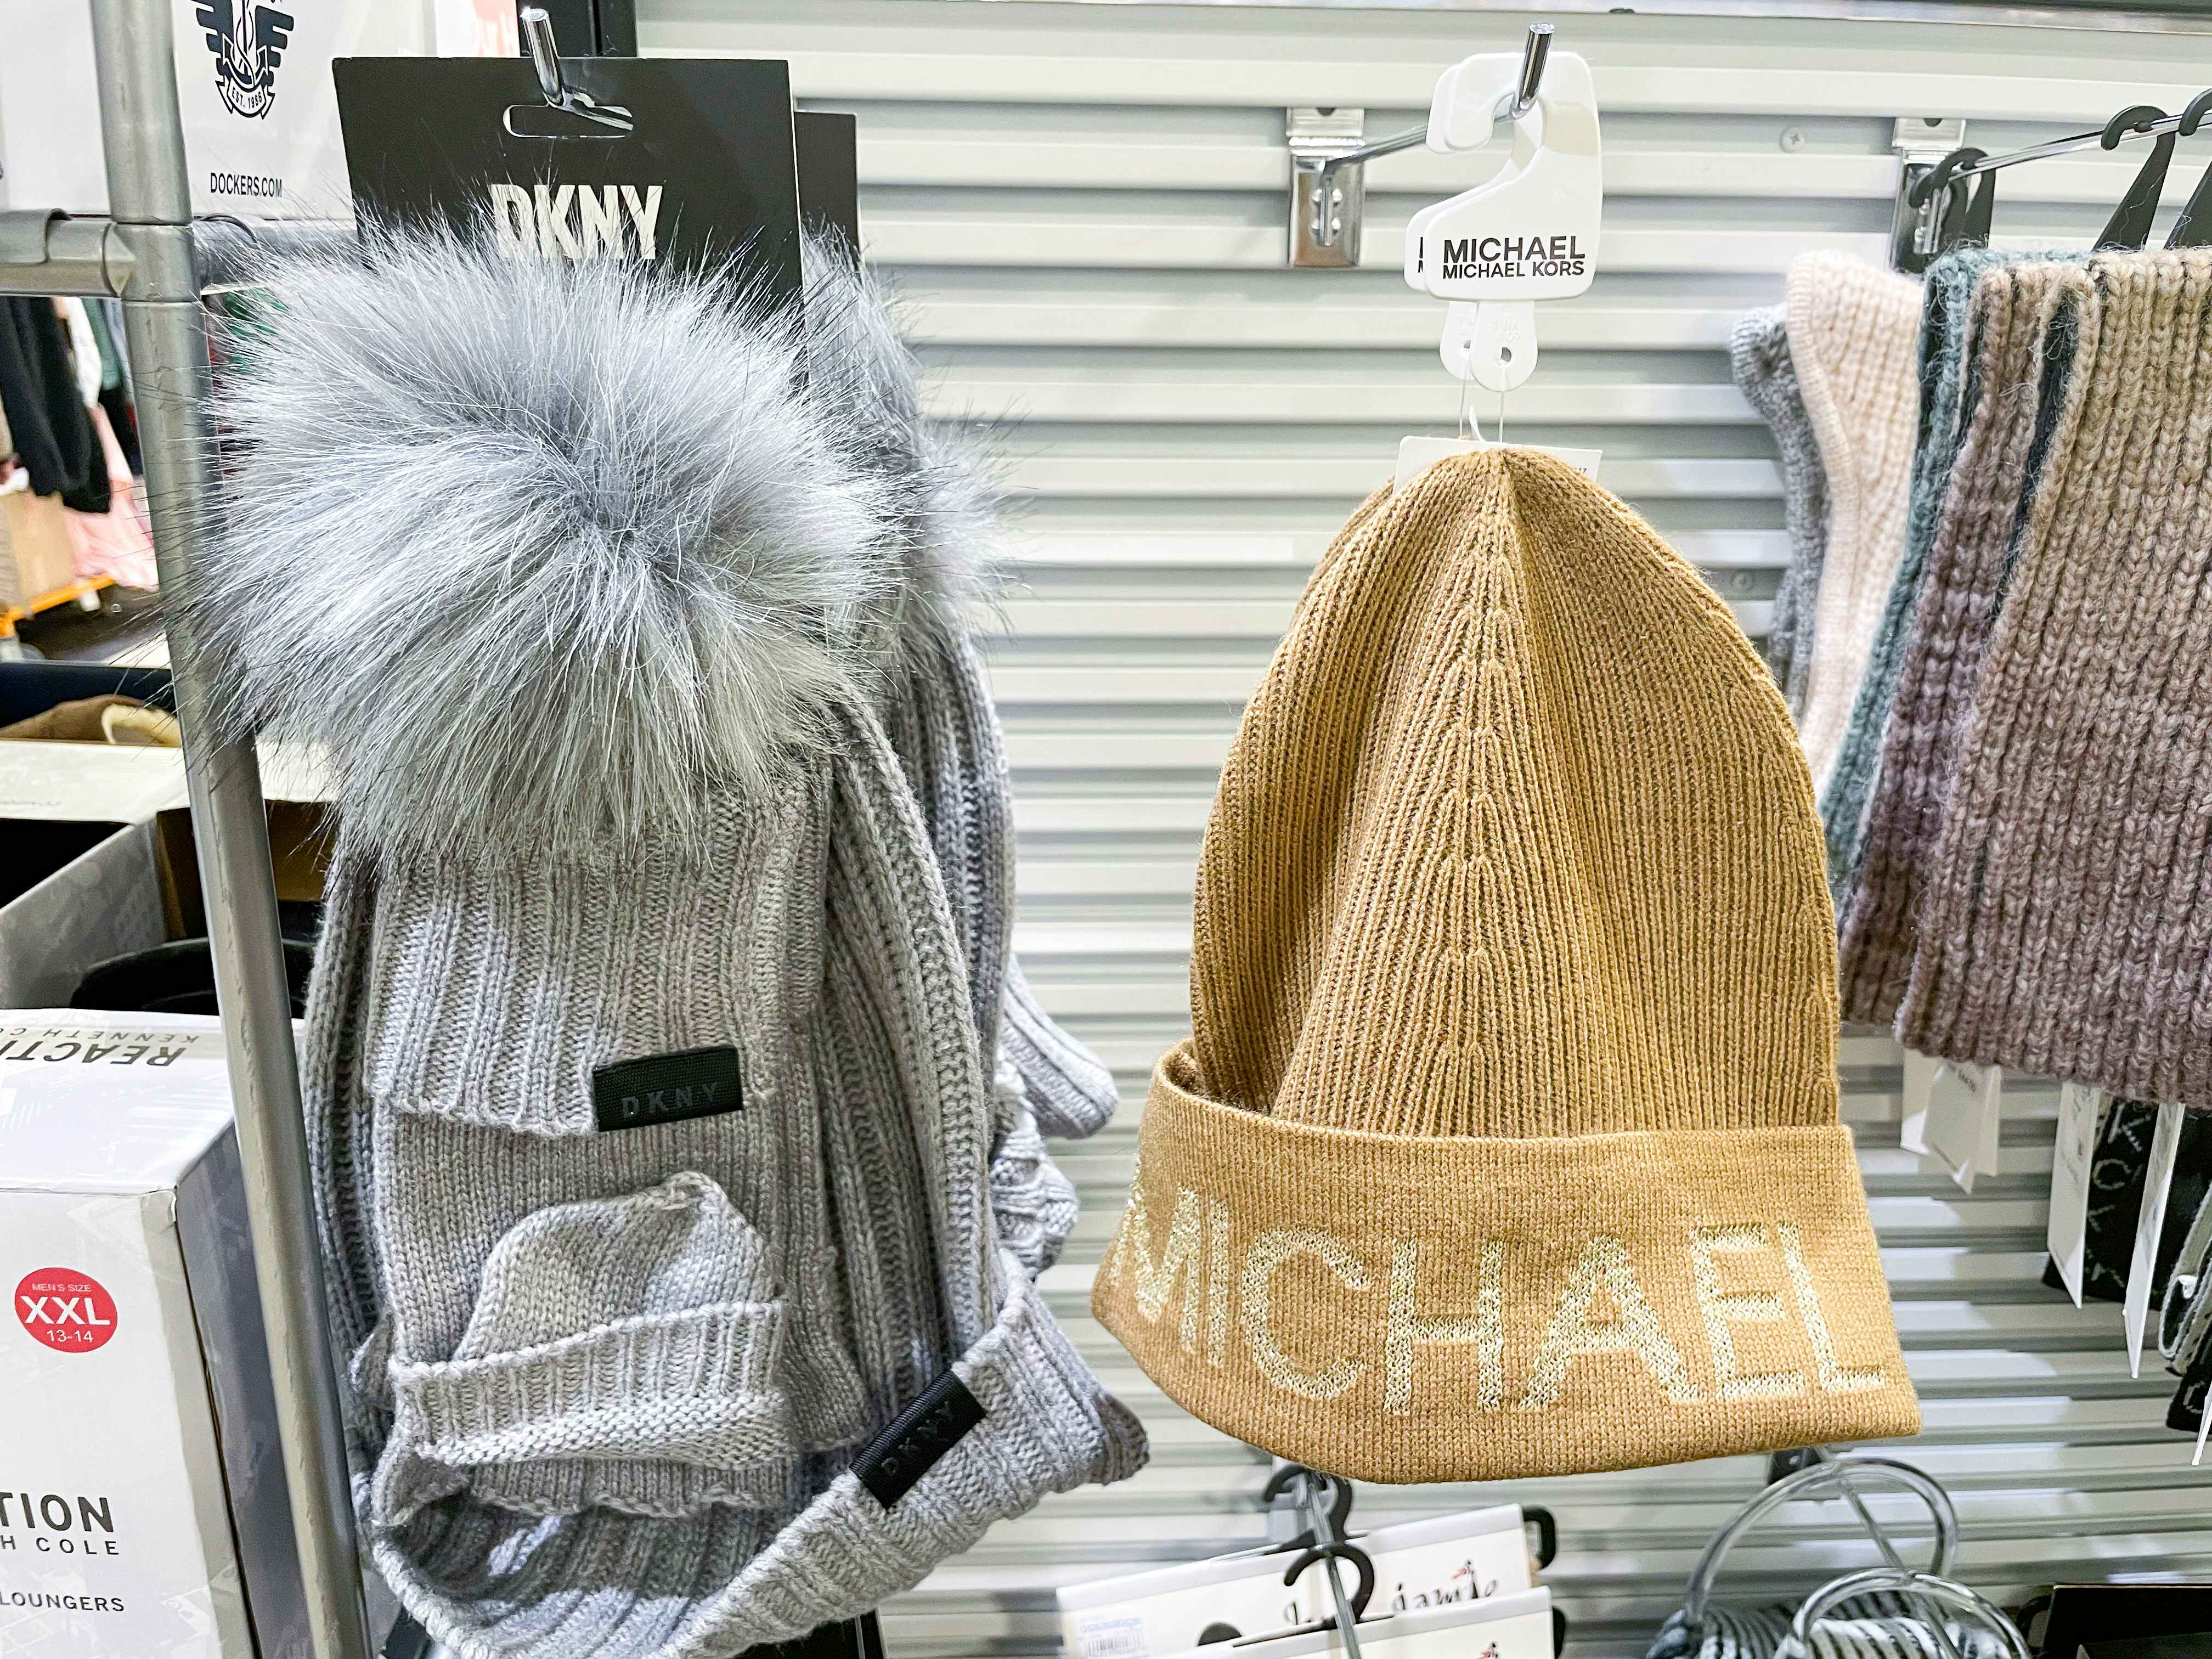 a michael kors beanie and a DKNY hat and glove set hanging next to each other at Macy's Backstage